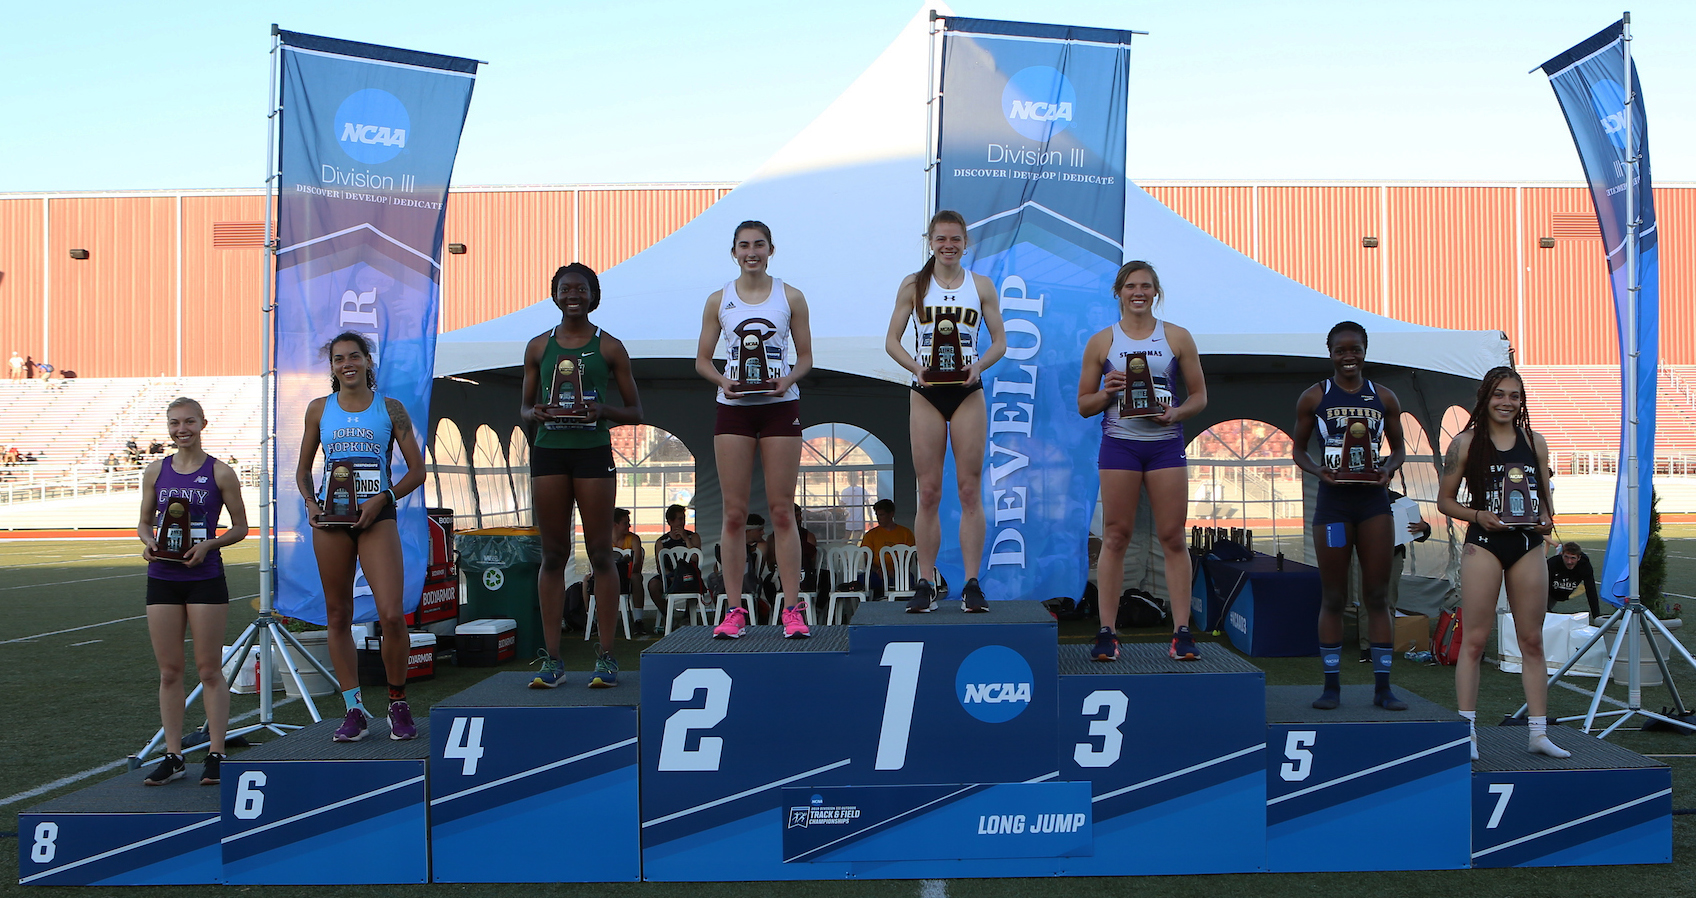 Lauren Wrensch won the long jump at the NCAA Championship with a school-record leap. The event title was the 50th for the Titans.